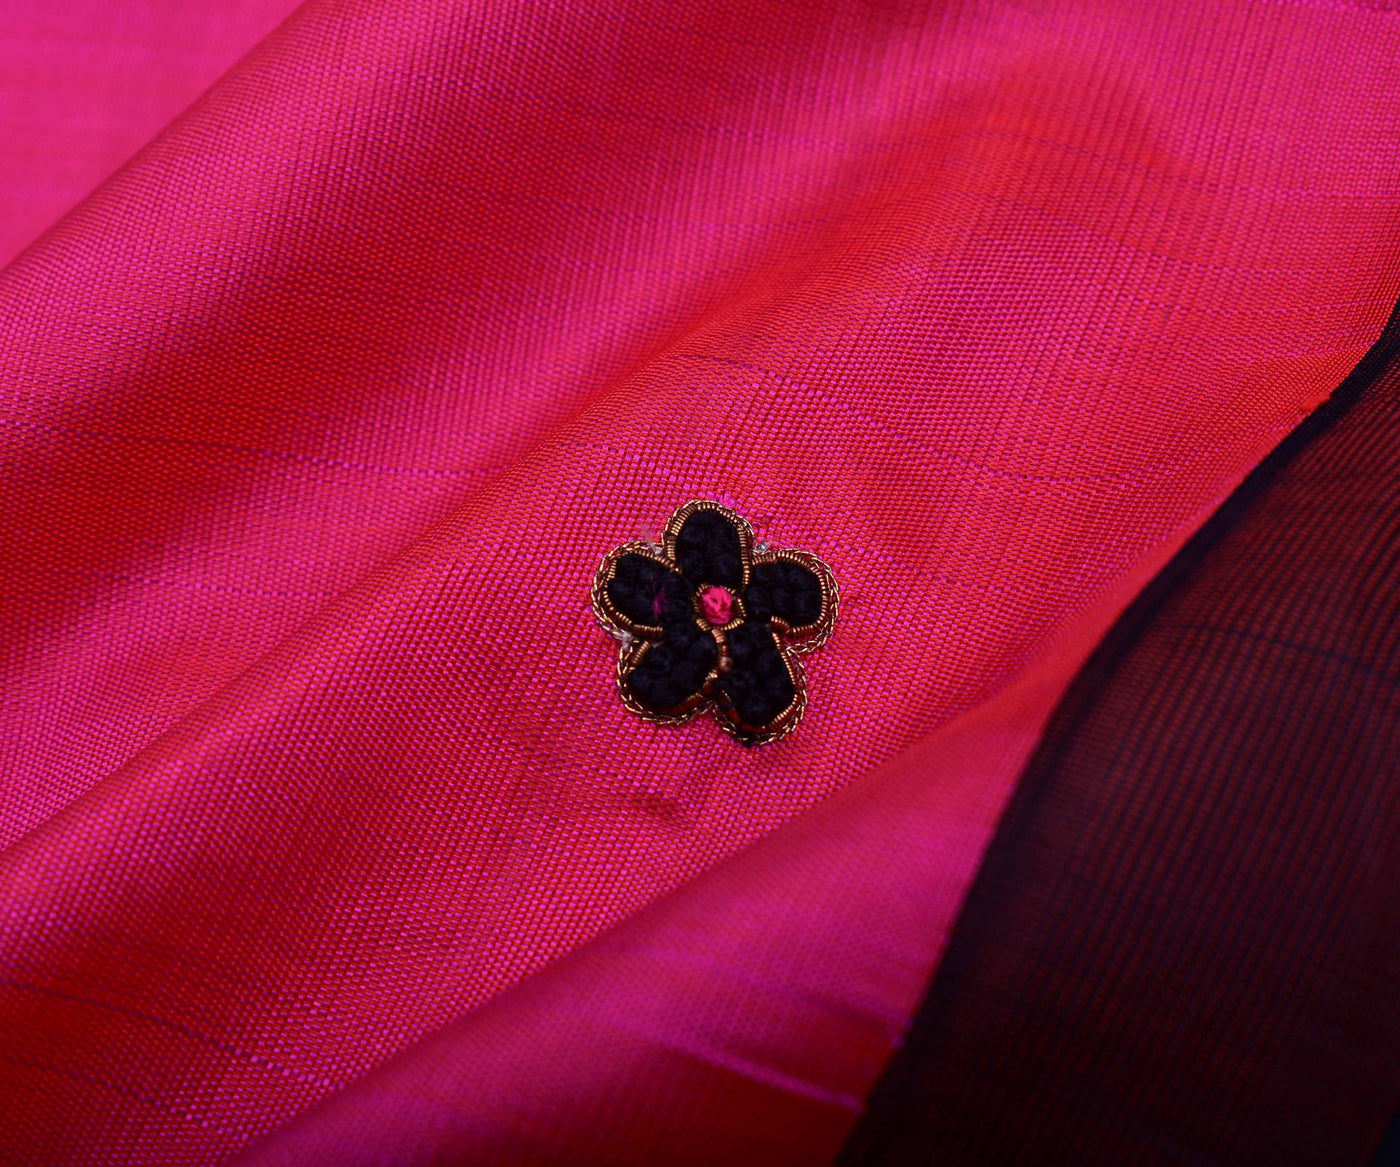 hot-pink-kanchi-silk-saree-with-black-pallu-crafted-with-bullion-knots-zardosi-and-beads-with-blouse